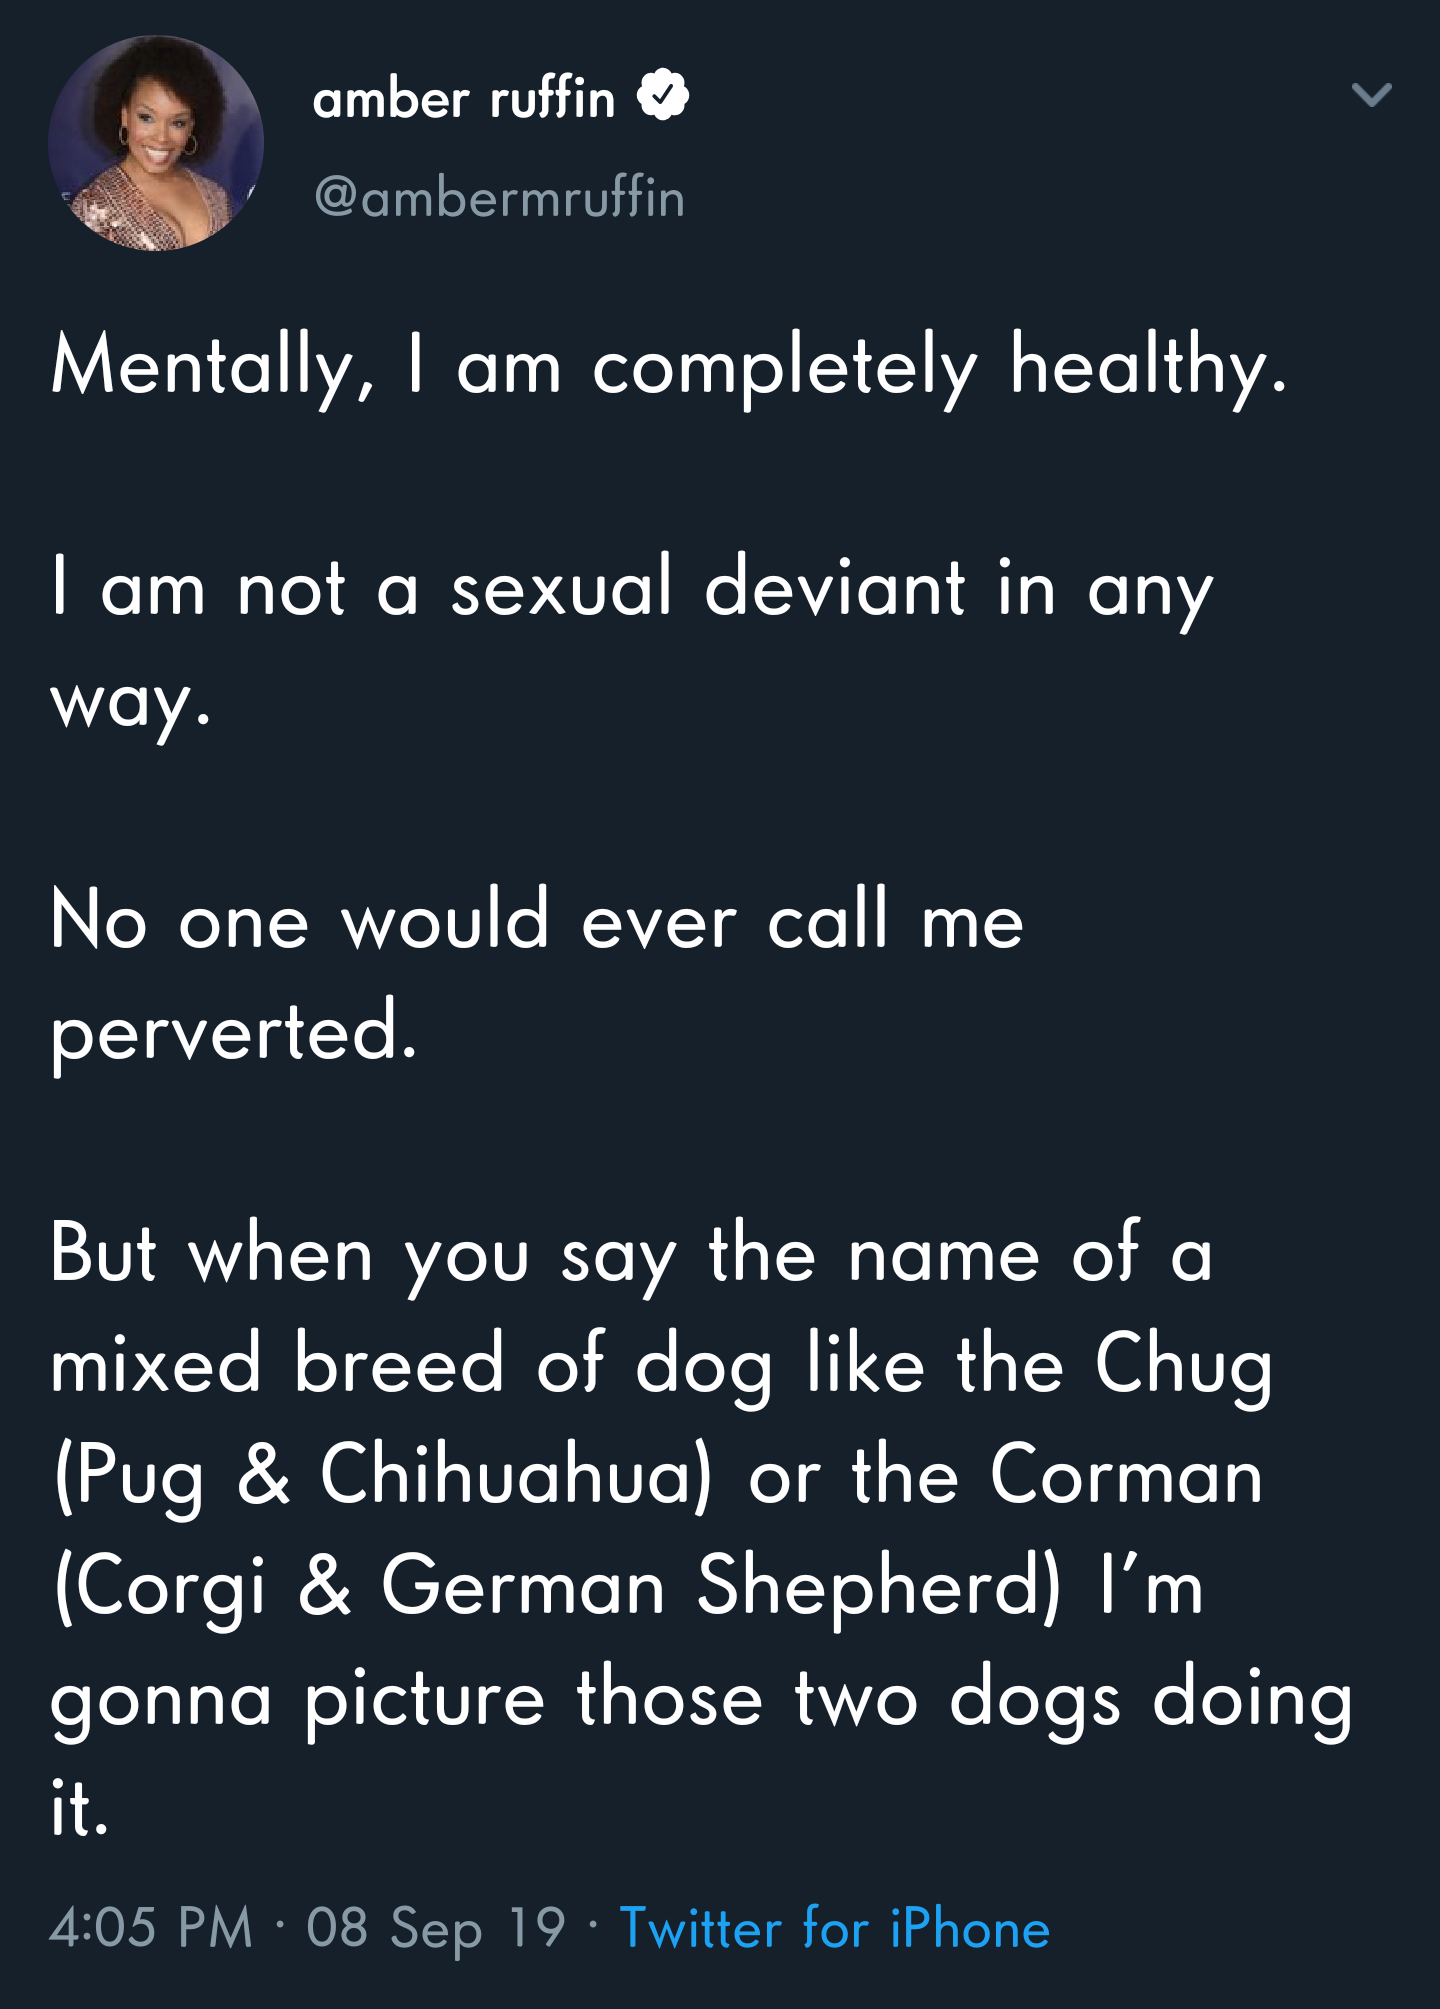 amber ruffin Mentally, I am completely healthy. I am not a sexual deviant in any way. No one would ever call me perverted. But when you say the name of a mixed breed of dog the Chug Pug & Chihuahua or the Corman Corgi & German Shepherd I'm go